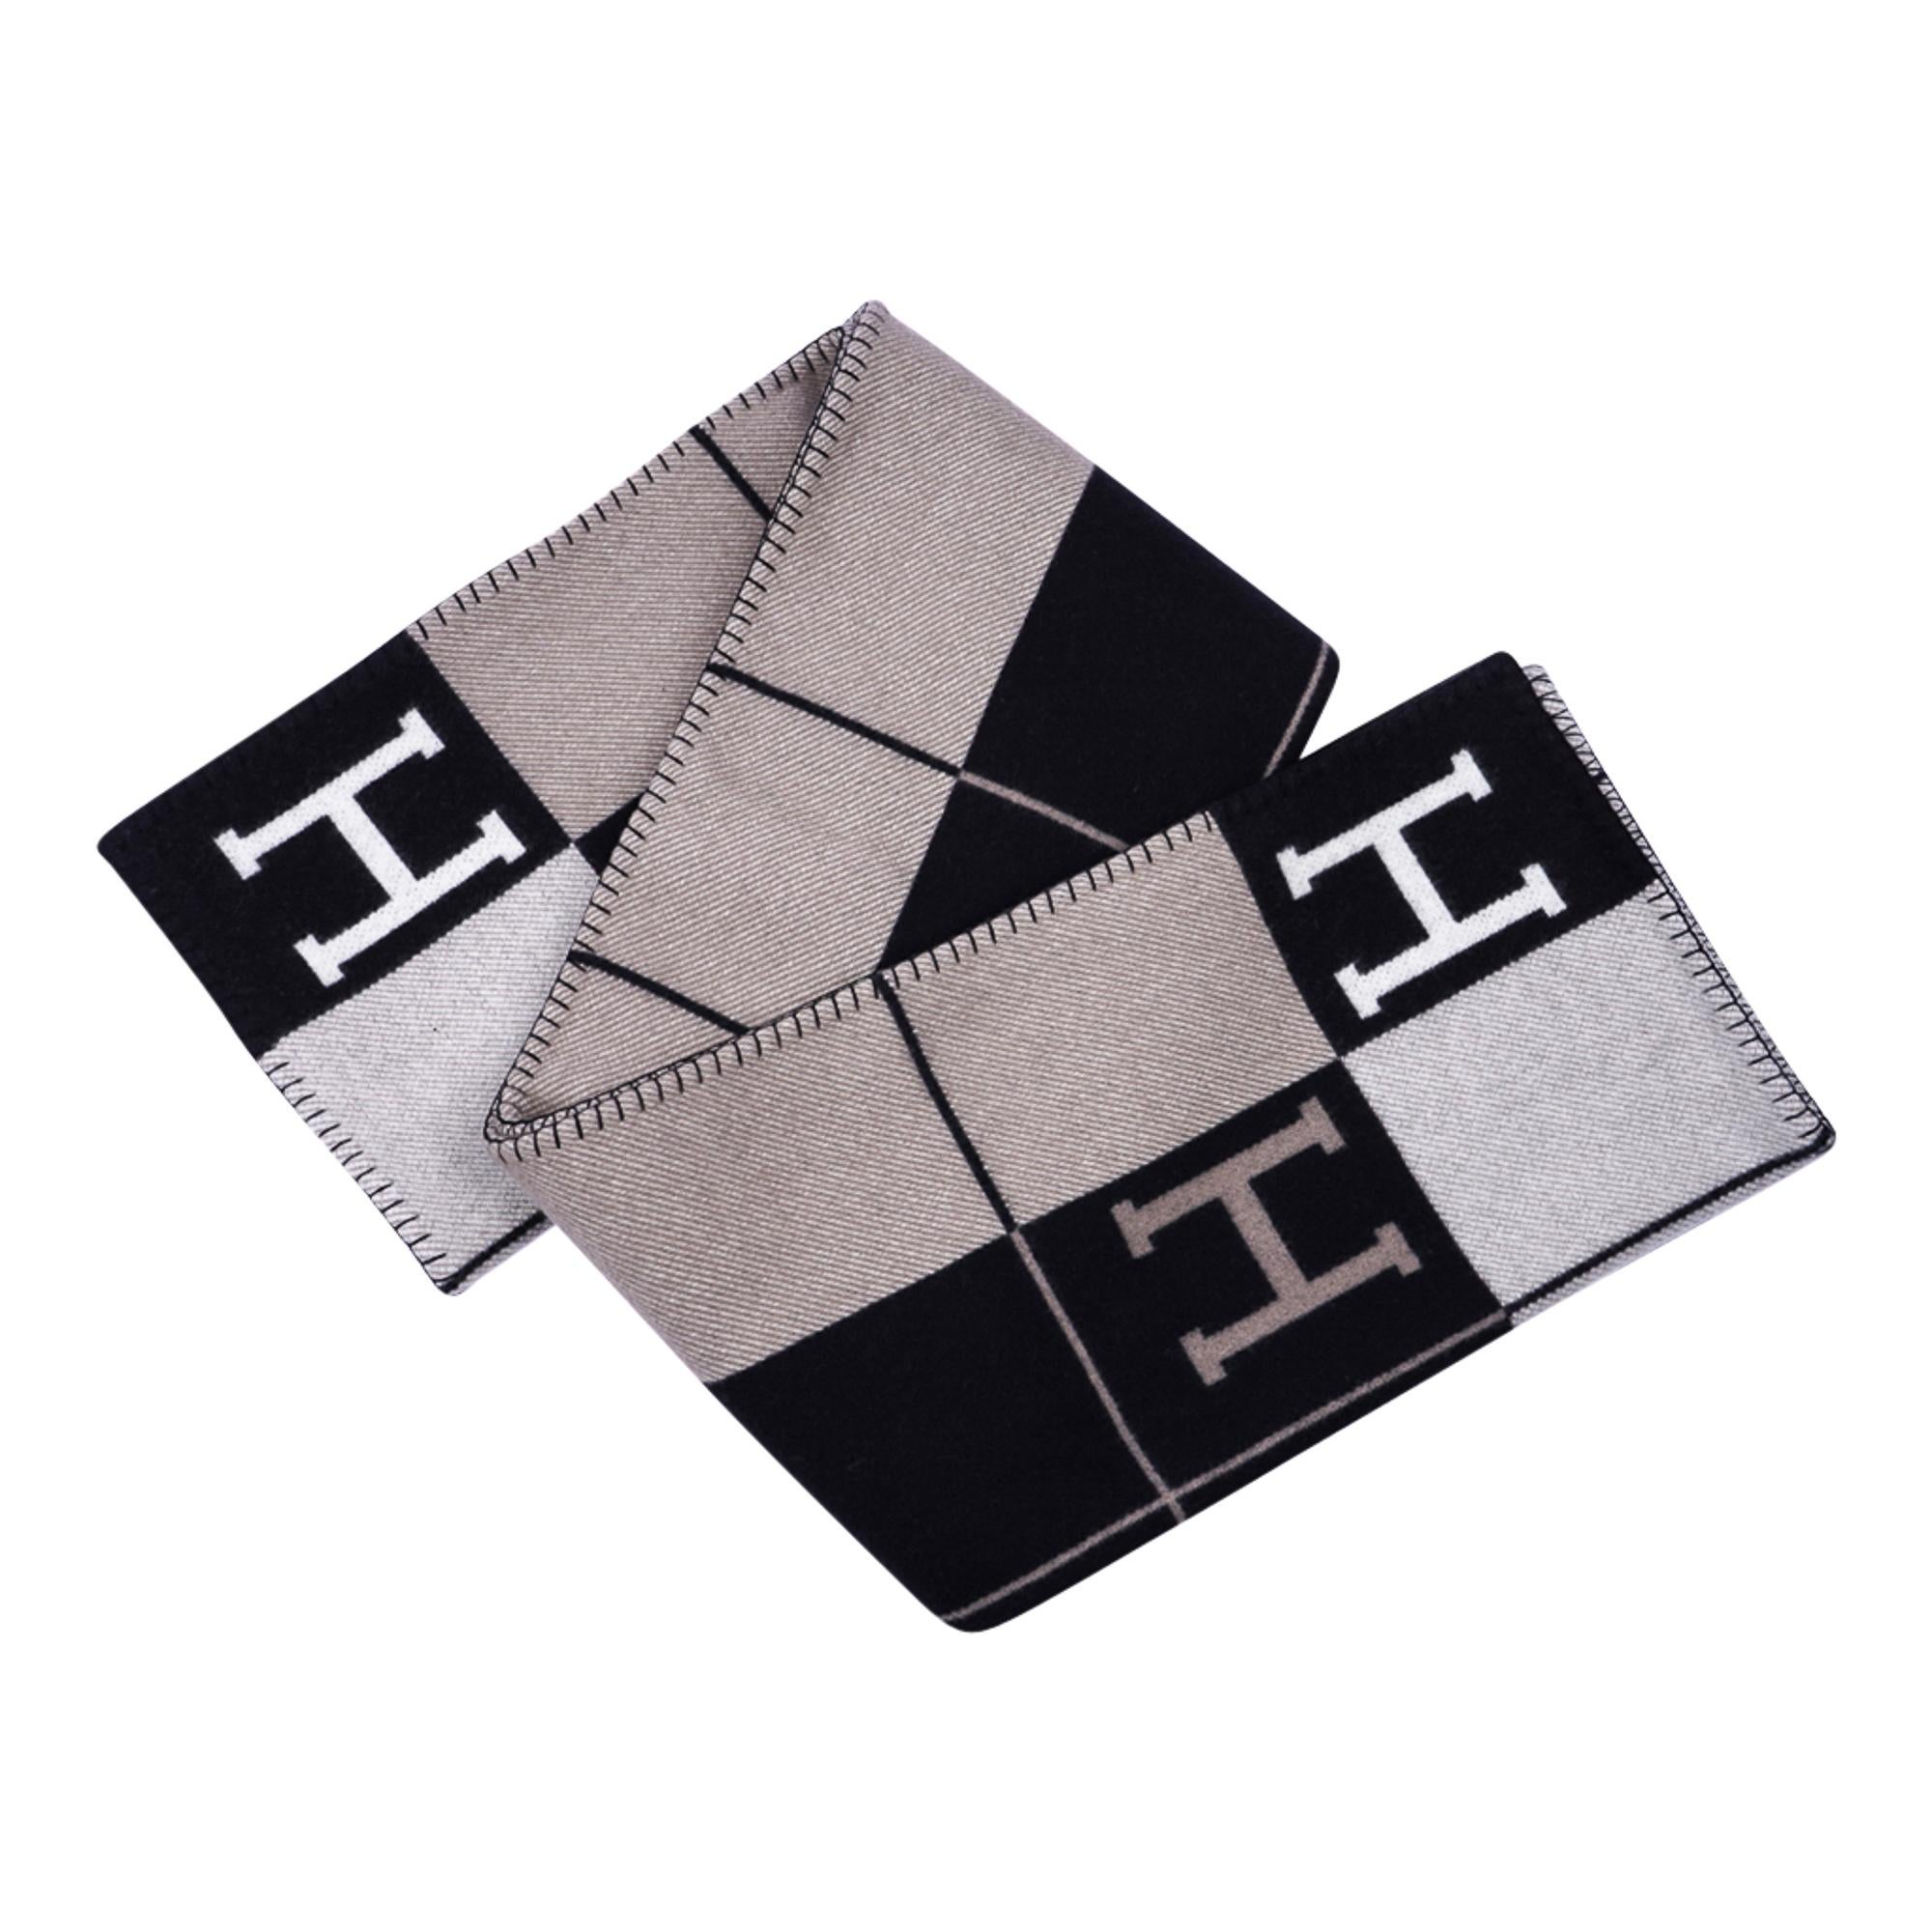 Mightychic offer a guaranteed authentic Hermes classic Avalon III signature H blanket featured in rare Black, Camel and Ecru.
Created from 90% Merino Wool and 10% cashmere and has whip stitch edges.
New or Pristine Store Fresh Condition.